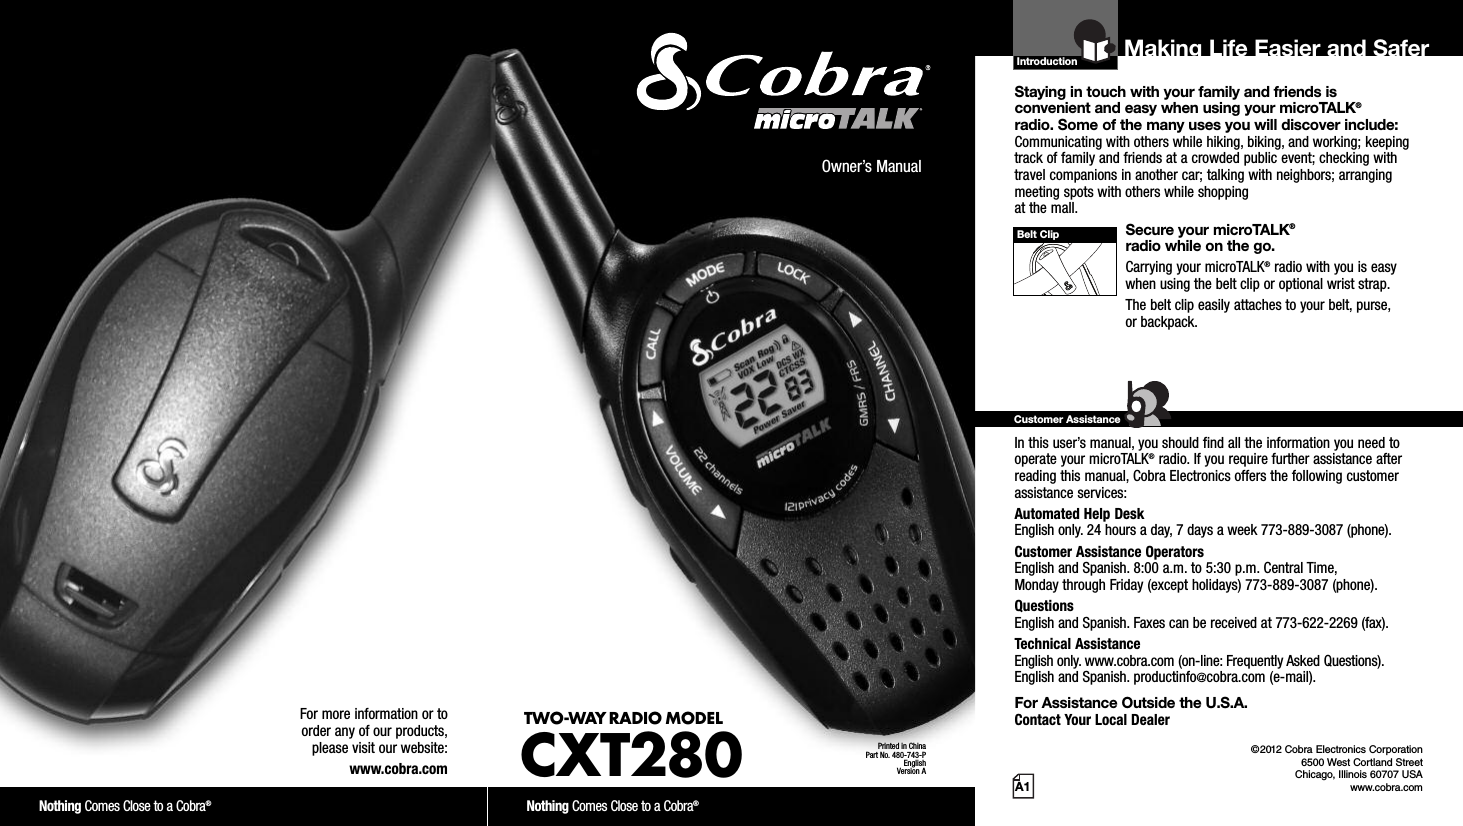 Introduction©2012 Cobra Electronics Corporation6500 West Cortland StreetChicago, Illinois 60707 USAwww.cobra.comMaking Life Easier and SaferStaying in touch with your family and friends is convenient and easy when using your microTALK®radio. Some of the many uses you will discover include:Communicating with others while hiking, biking, and working; keepingtrack of family and friends at a crowded public event; checking withtravel companions in another car; talking with neighbors; arrangingmeeting spots with others while shopping at the mall.Secure your microTALK®radio while on the go.Carrying your microTALK®radio with you is easywhen using the belt clip or optional wrist strap. The belt clip easily attaches to your belt, purse, or backpack.For Assistance in the U.S.A. In this user’s manual, you should find all the information you need tooperate your microTALK®radio. If you require further assistance afterreading this manual, Cobra Electronics offers the following customerassistance services:Automated Help Desk English only. 24 hours a day, 7 days a week 773-889-3087 (phone). Customer Assistance OperatorsEnglish and Spanish. 8:00 a.m. to 5:30 p.m. Central Time, Monday through Friday (except holidays) 773-889-3087 (phone). QuestionsEnglish and Spanish. Faxes can be received at 773-622-2269 (fax). Technical AssistanceEnglish only. www.cobra.com (on-line: Frequently Asked Questions). English and Spanish. productinfo@cobra.com (e-mail).For Assistance Outside the U.S.A. Contact Your Local DealerCustomer AssistanceA1Owner’s ManualNothing Comes Close to a Cobra®Nothing Comes Close to a Cobra®For more information or to order any of our products, please visit our website:www.cobra.comBelt ClipPrinted in ChinaPart No. 480-743-PEnglishVersion ATWO-WAY RADIO MODEL CXT280